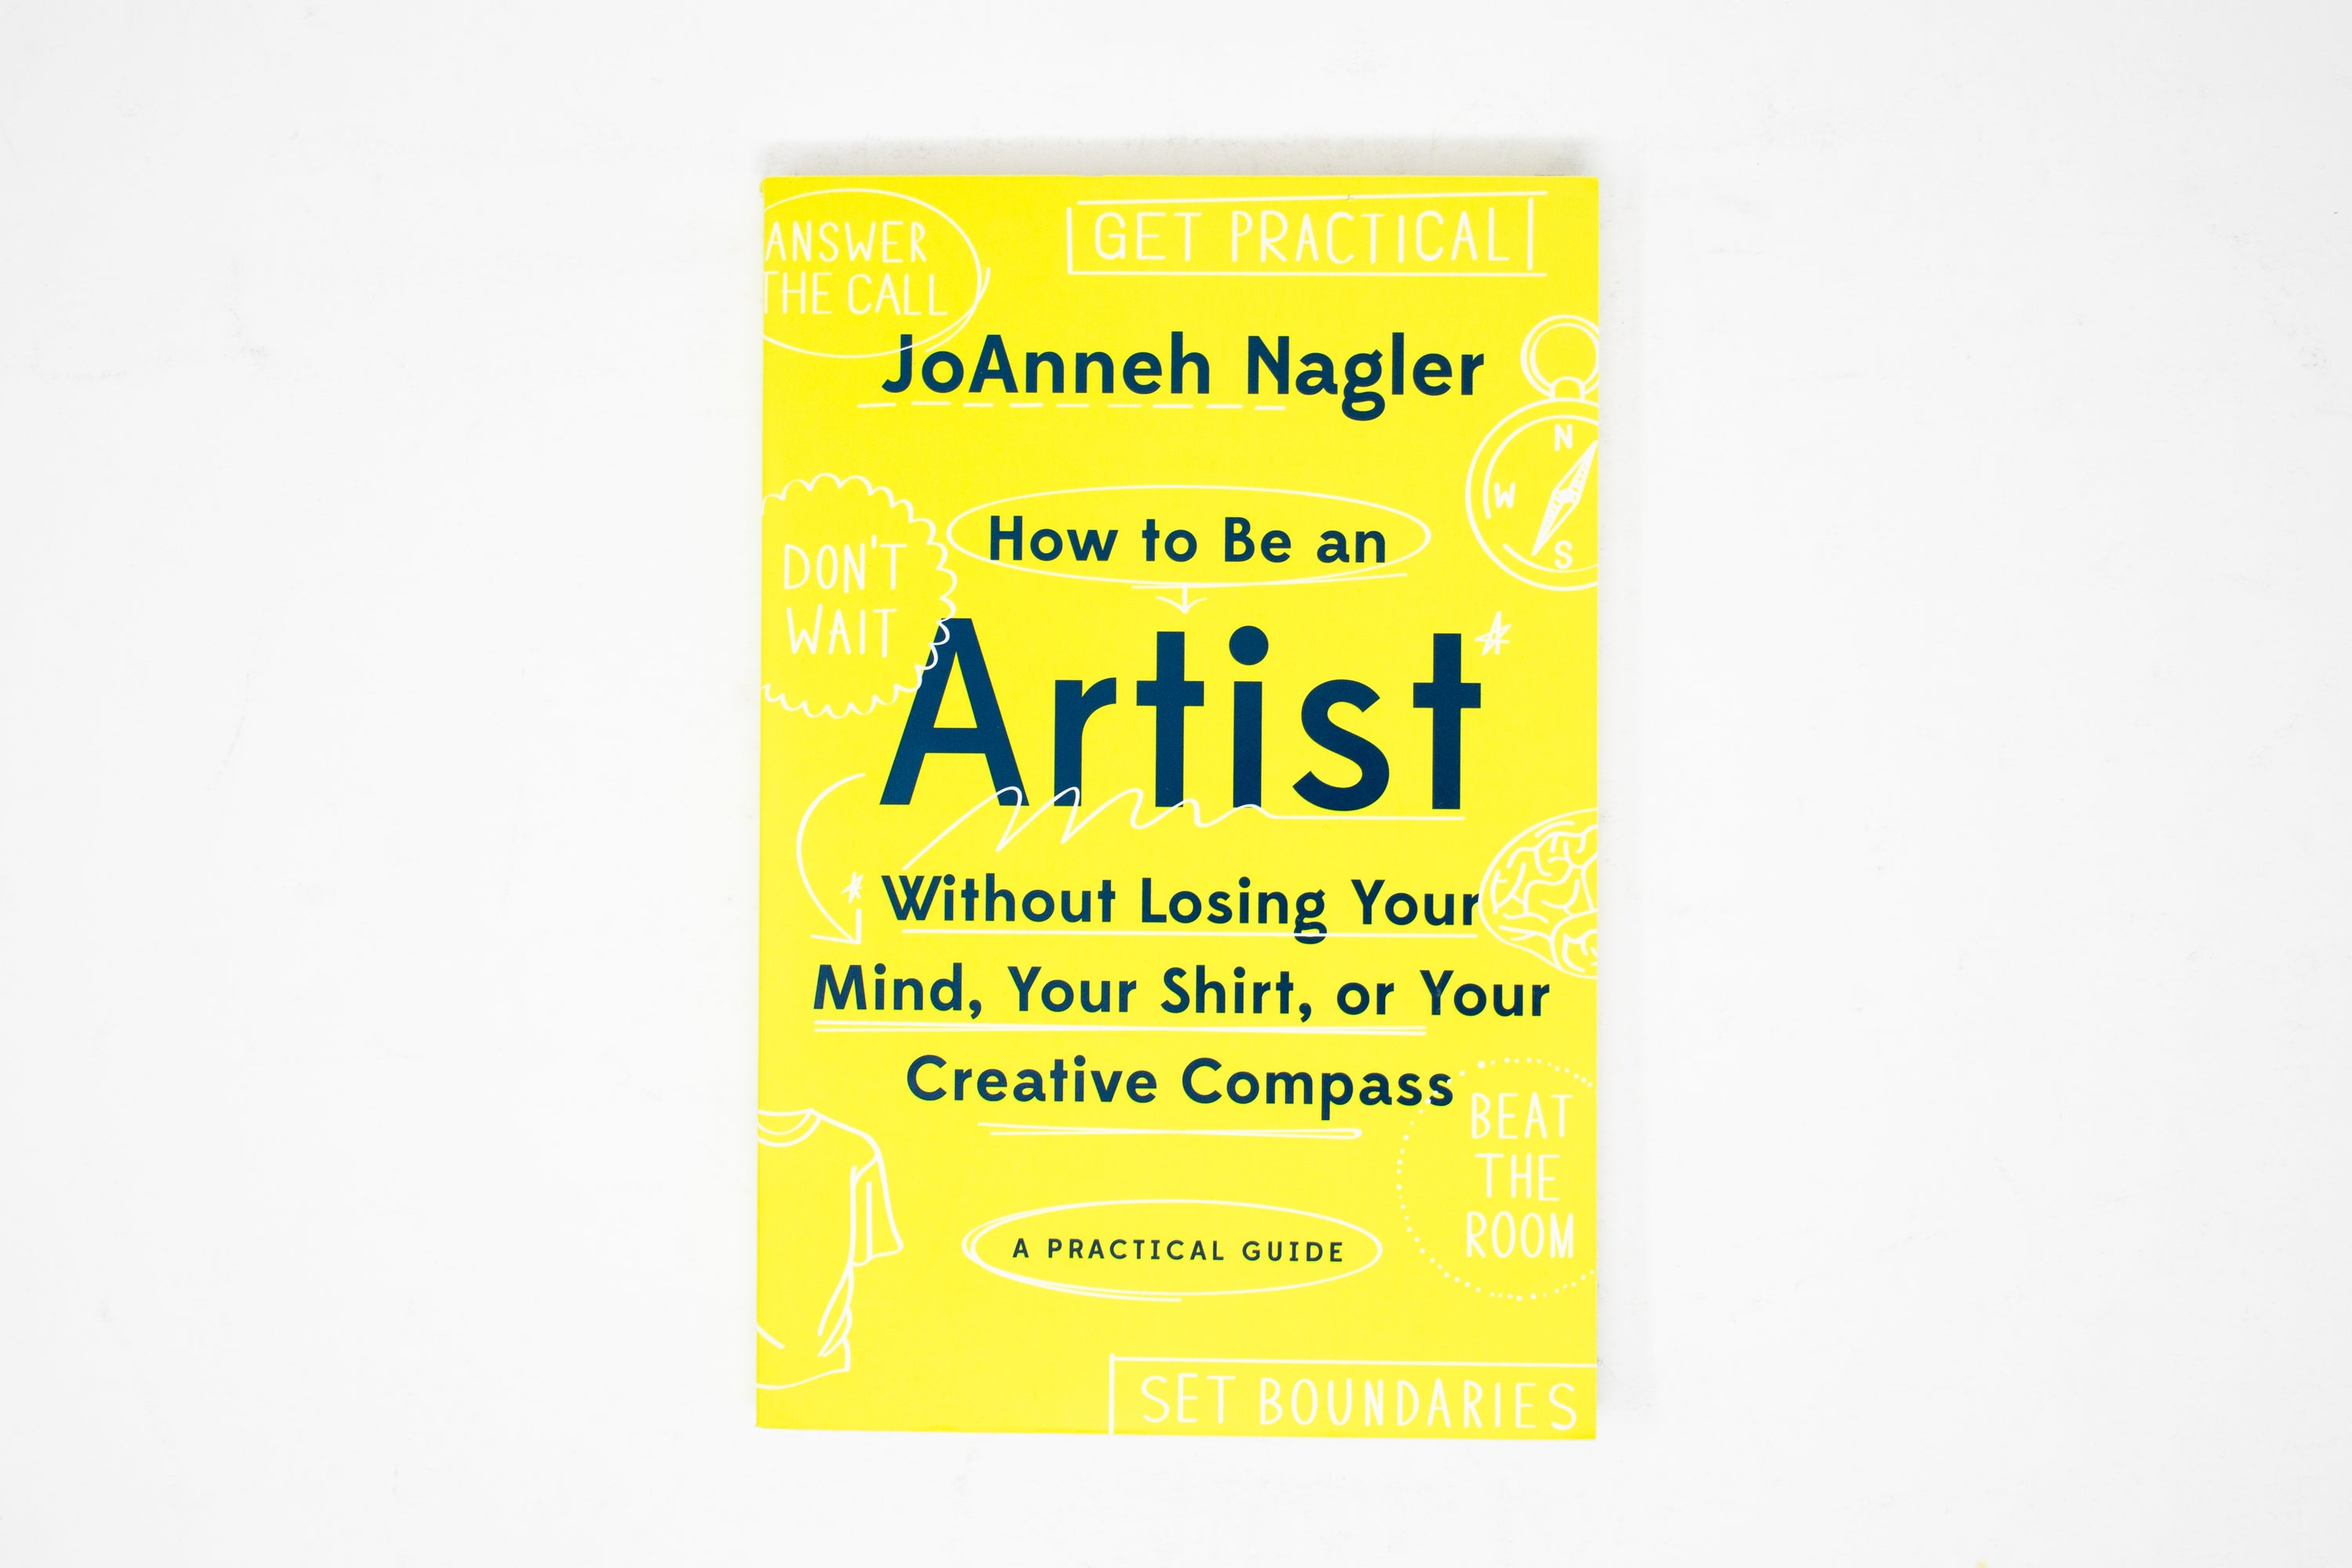 How to Be an Artist Without Losing Your Mind, Your Shirt, Or Your Creative Compass: Practical Guide